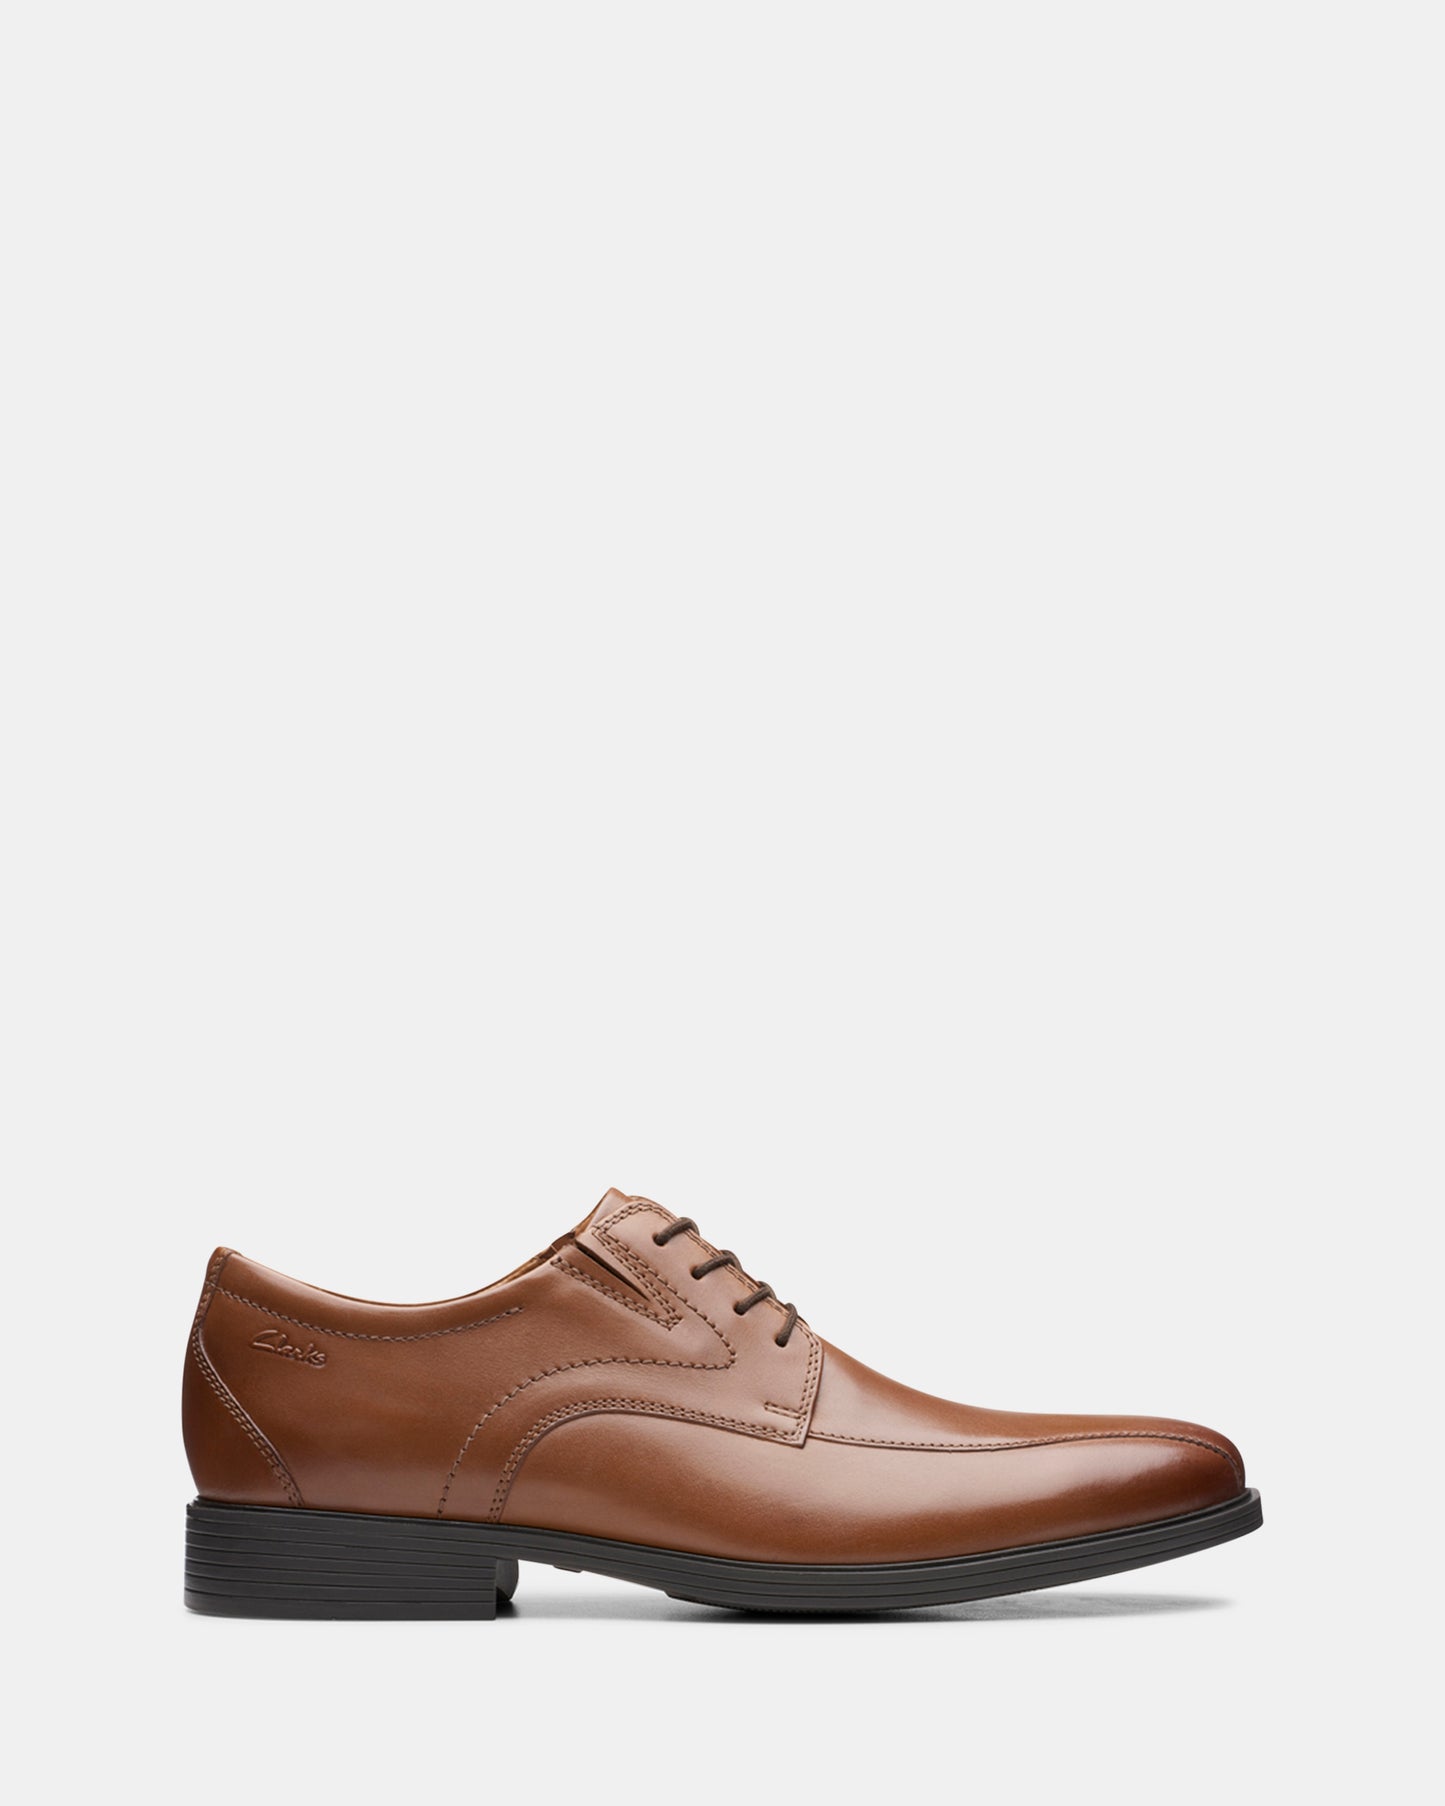 Whiddon Pace Dark Tan Leather